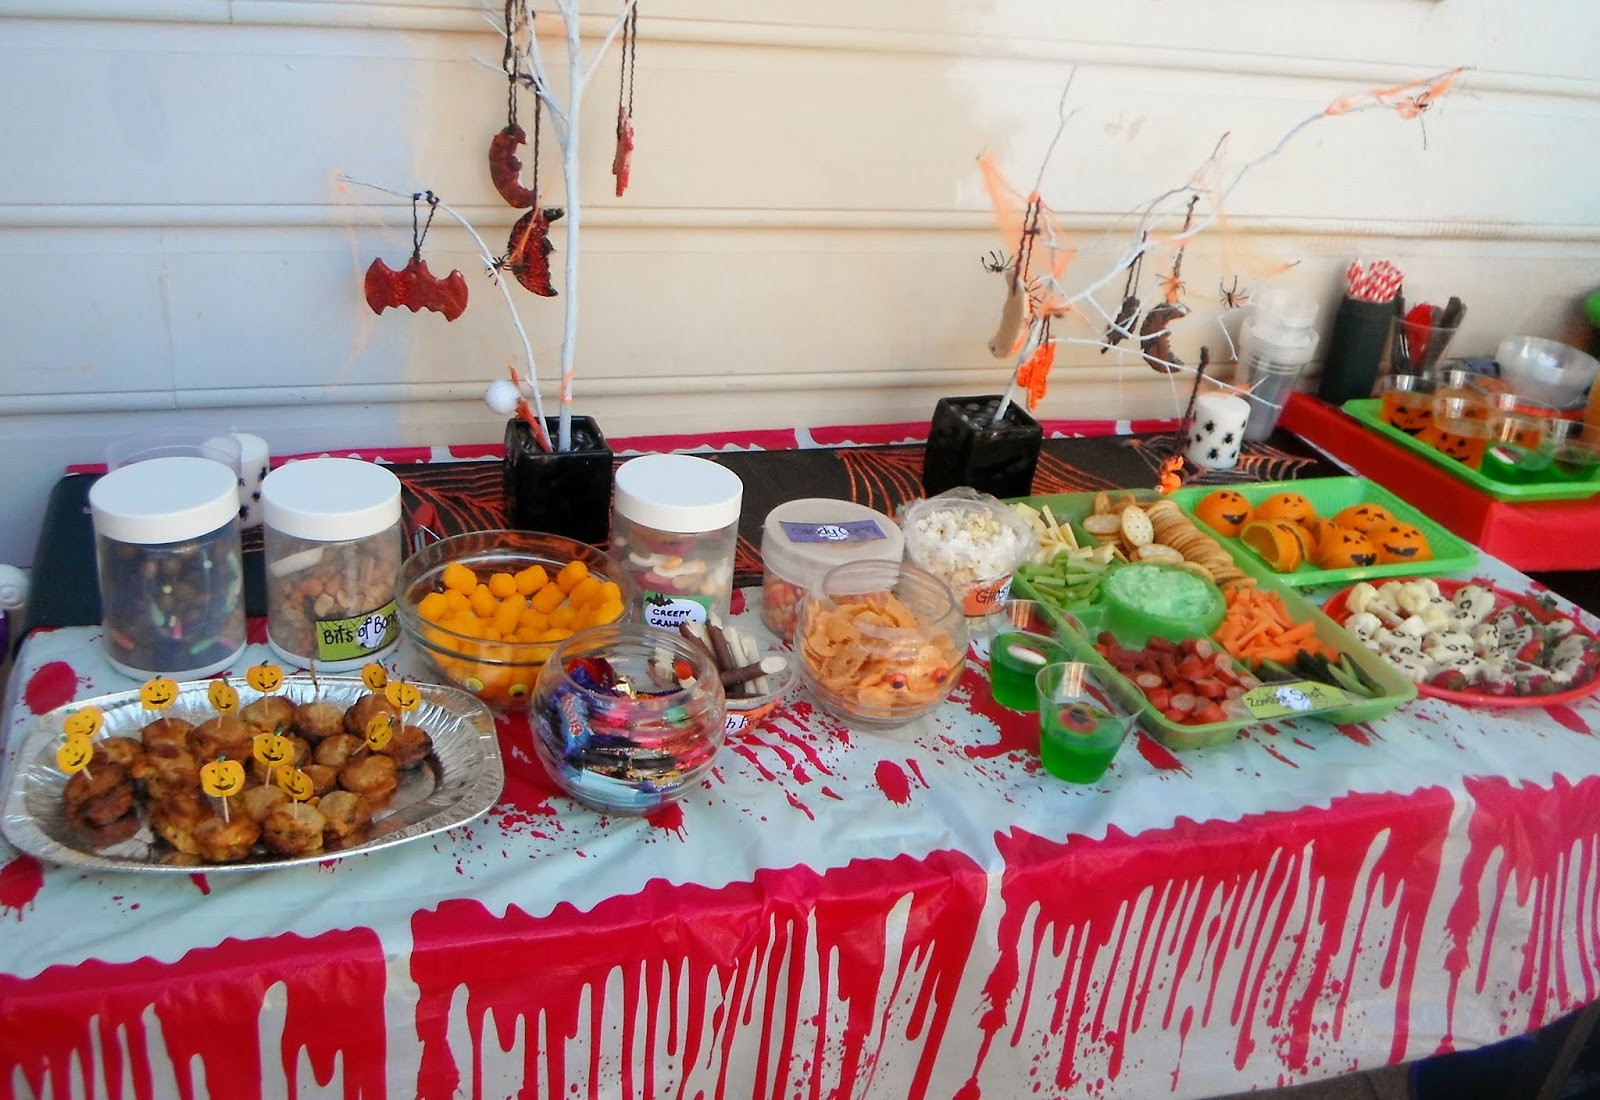 Childrens Halloween Party Food Ideas
 Adventures at home with Mum Halloween Party Food